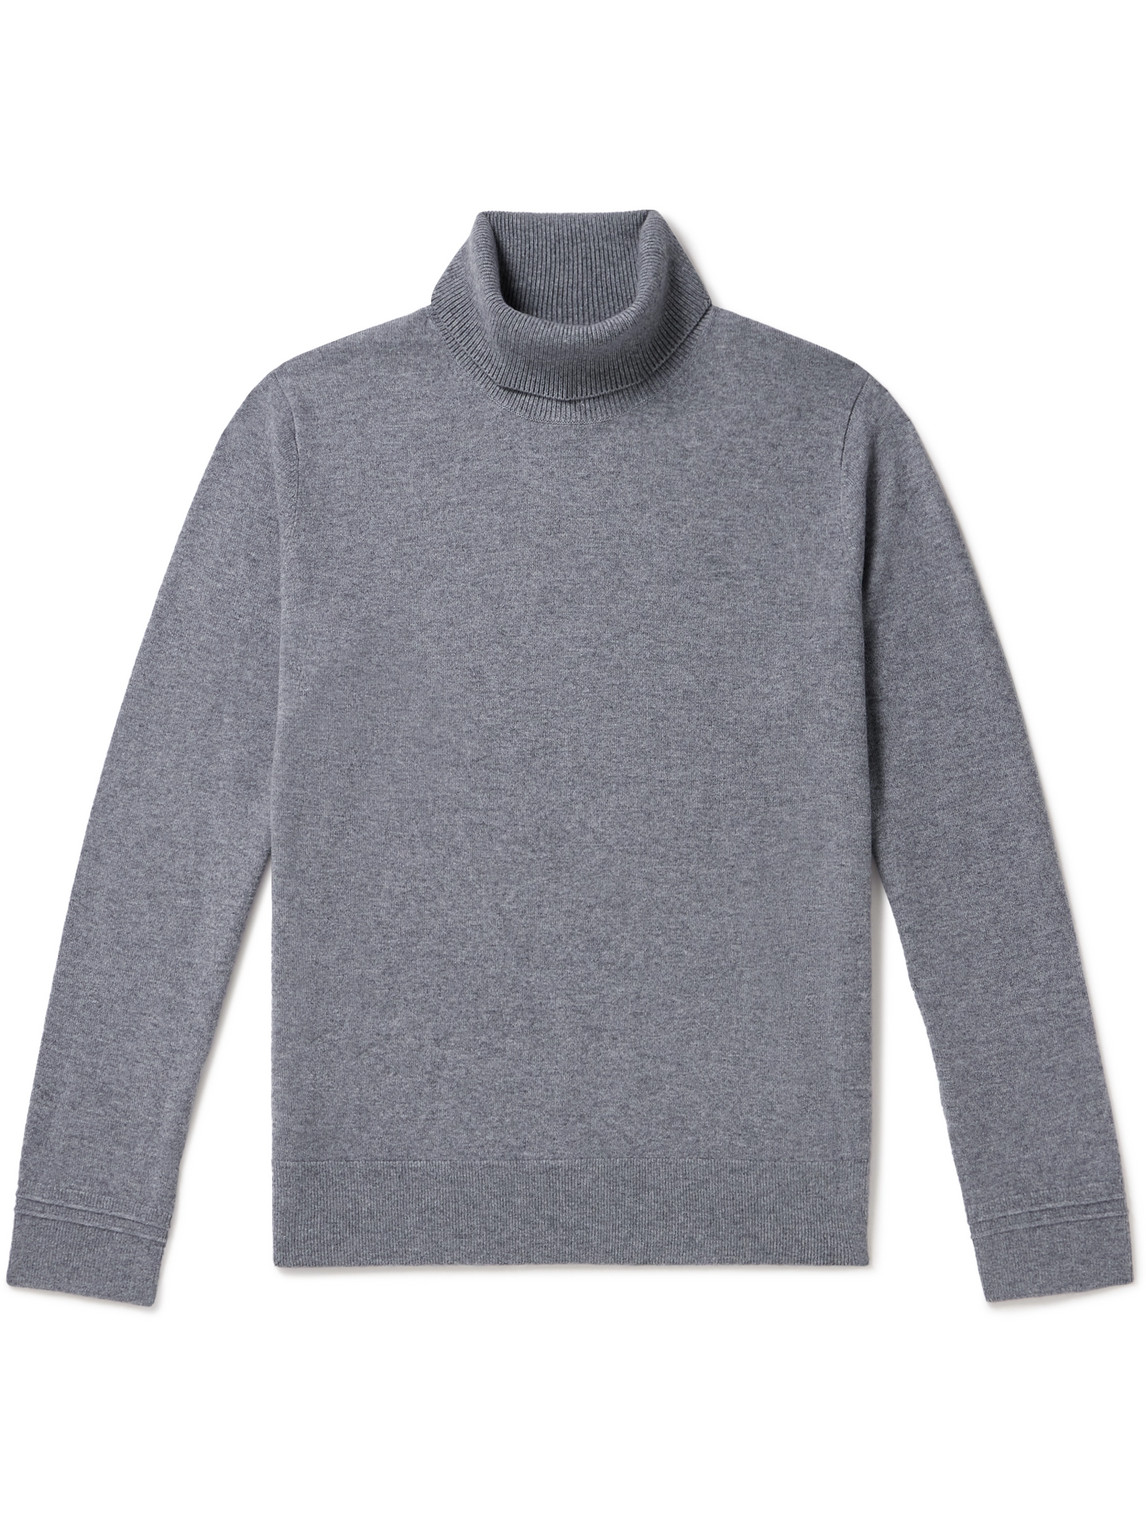 Mr P Cashmere Rollneck Sweater In Gray